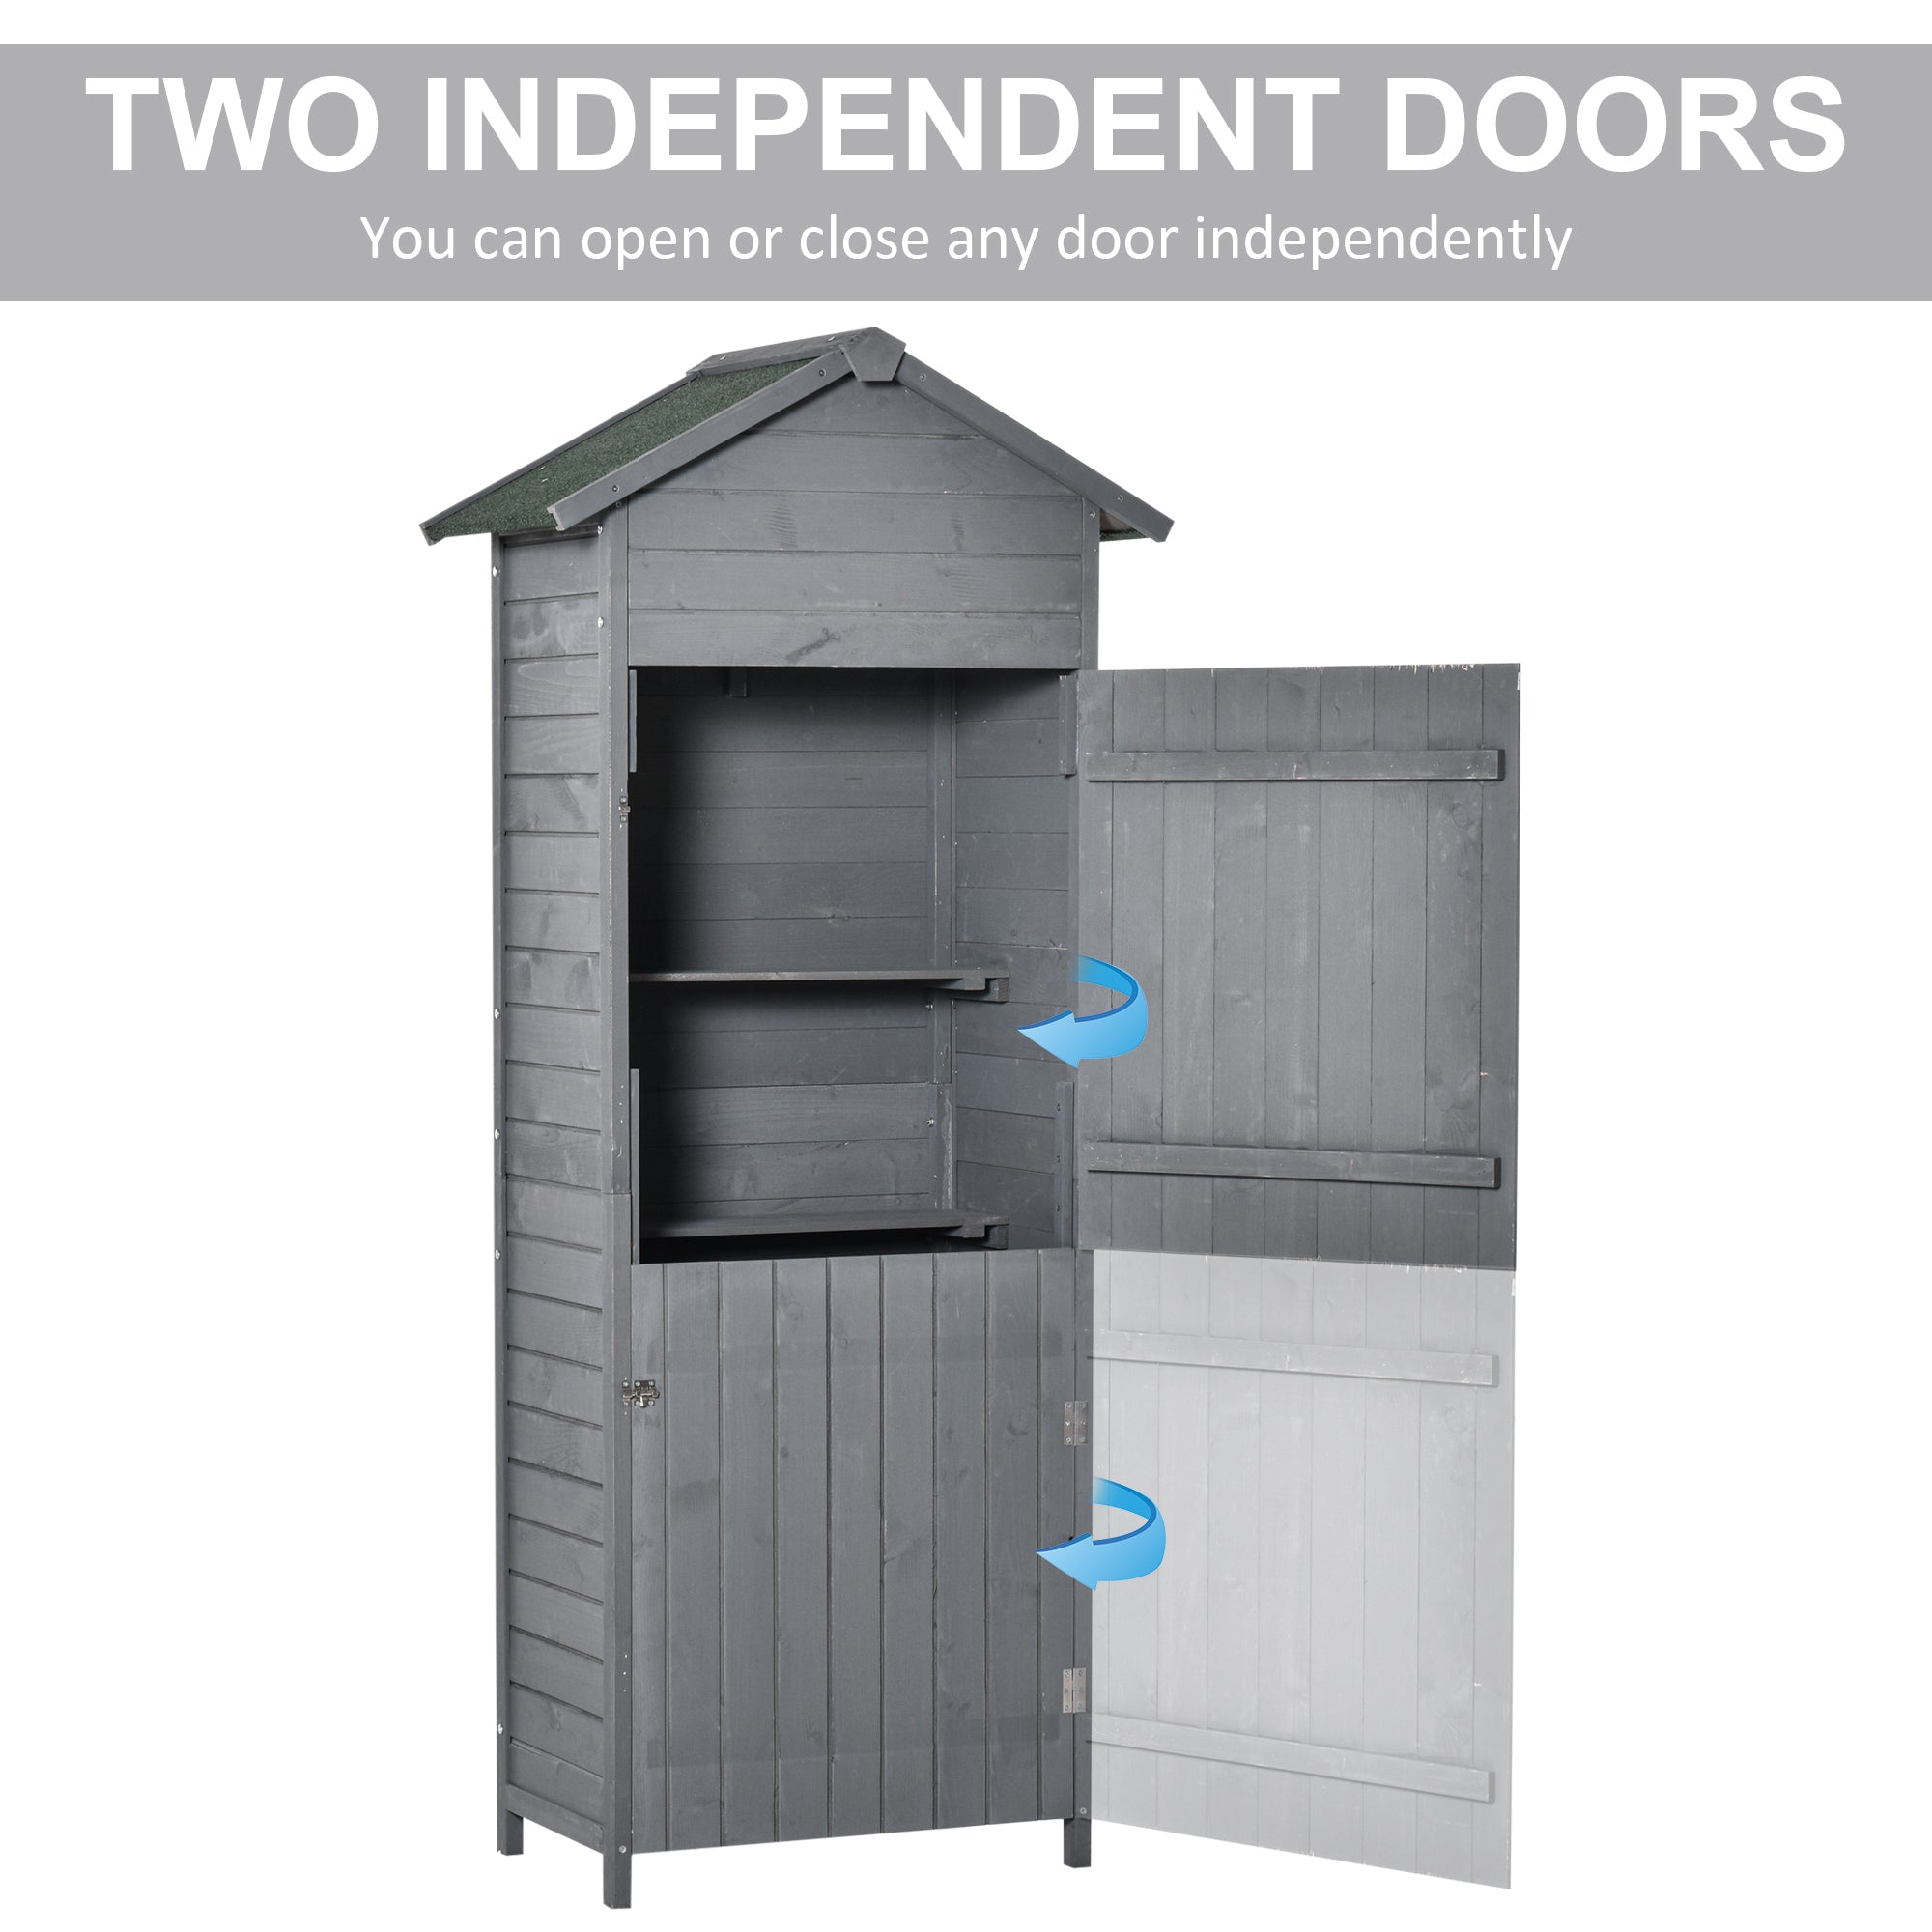 Outsunny Wooden Garden Storage Shed Timber Tool Cabinet Organiser w/ Tilted-felt Roof, Shelves, Lockable Doors, 189 x 82 x 49 cm, Grey - Inspirely